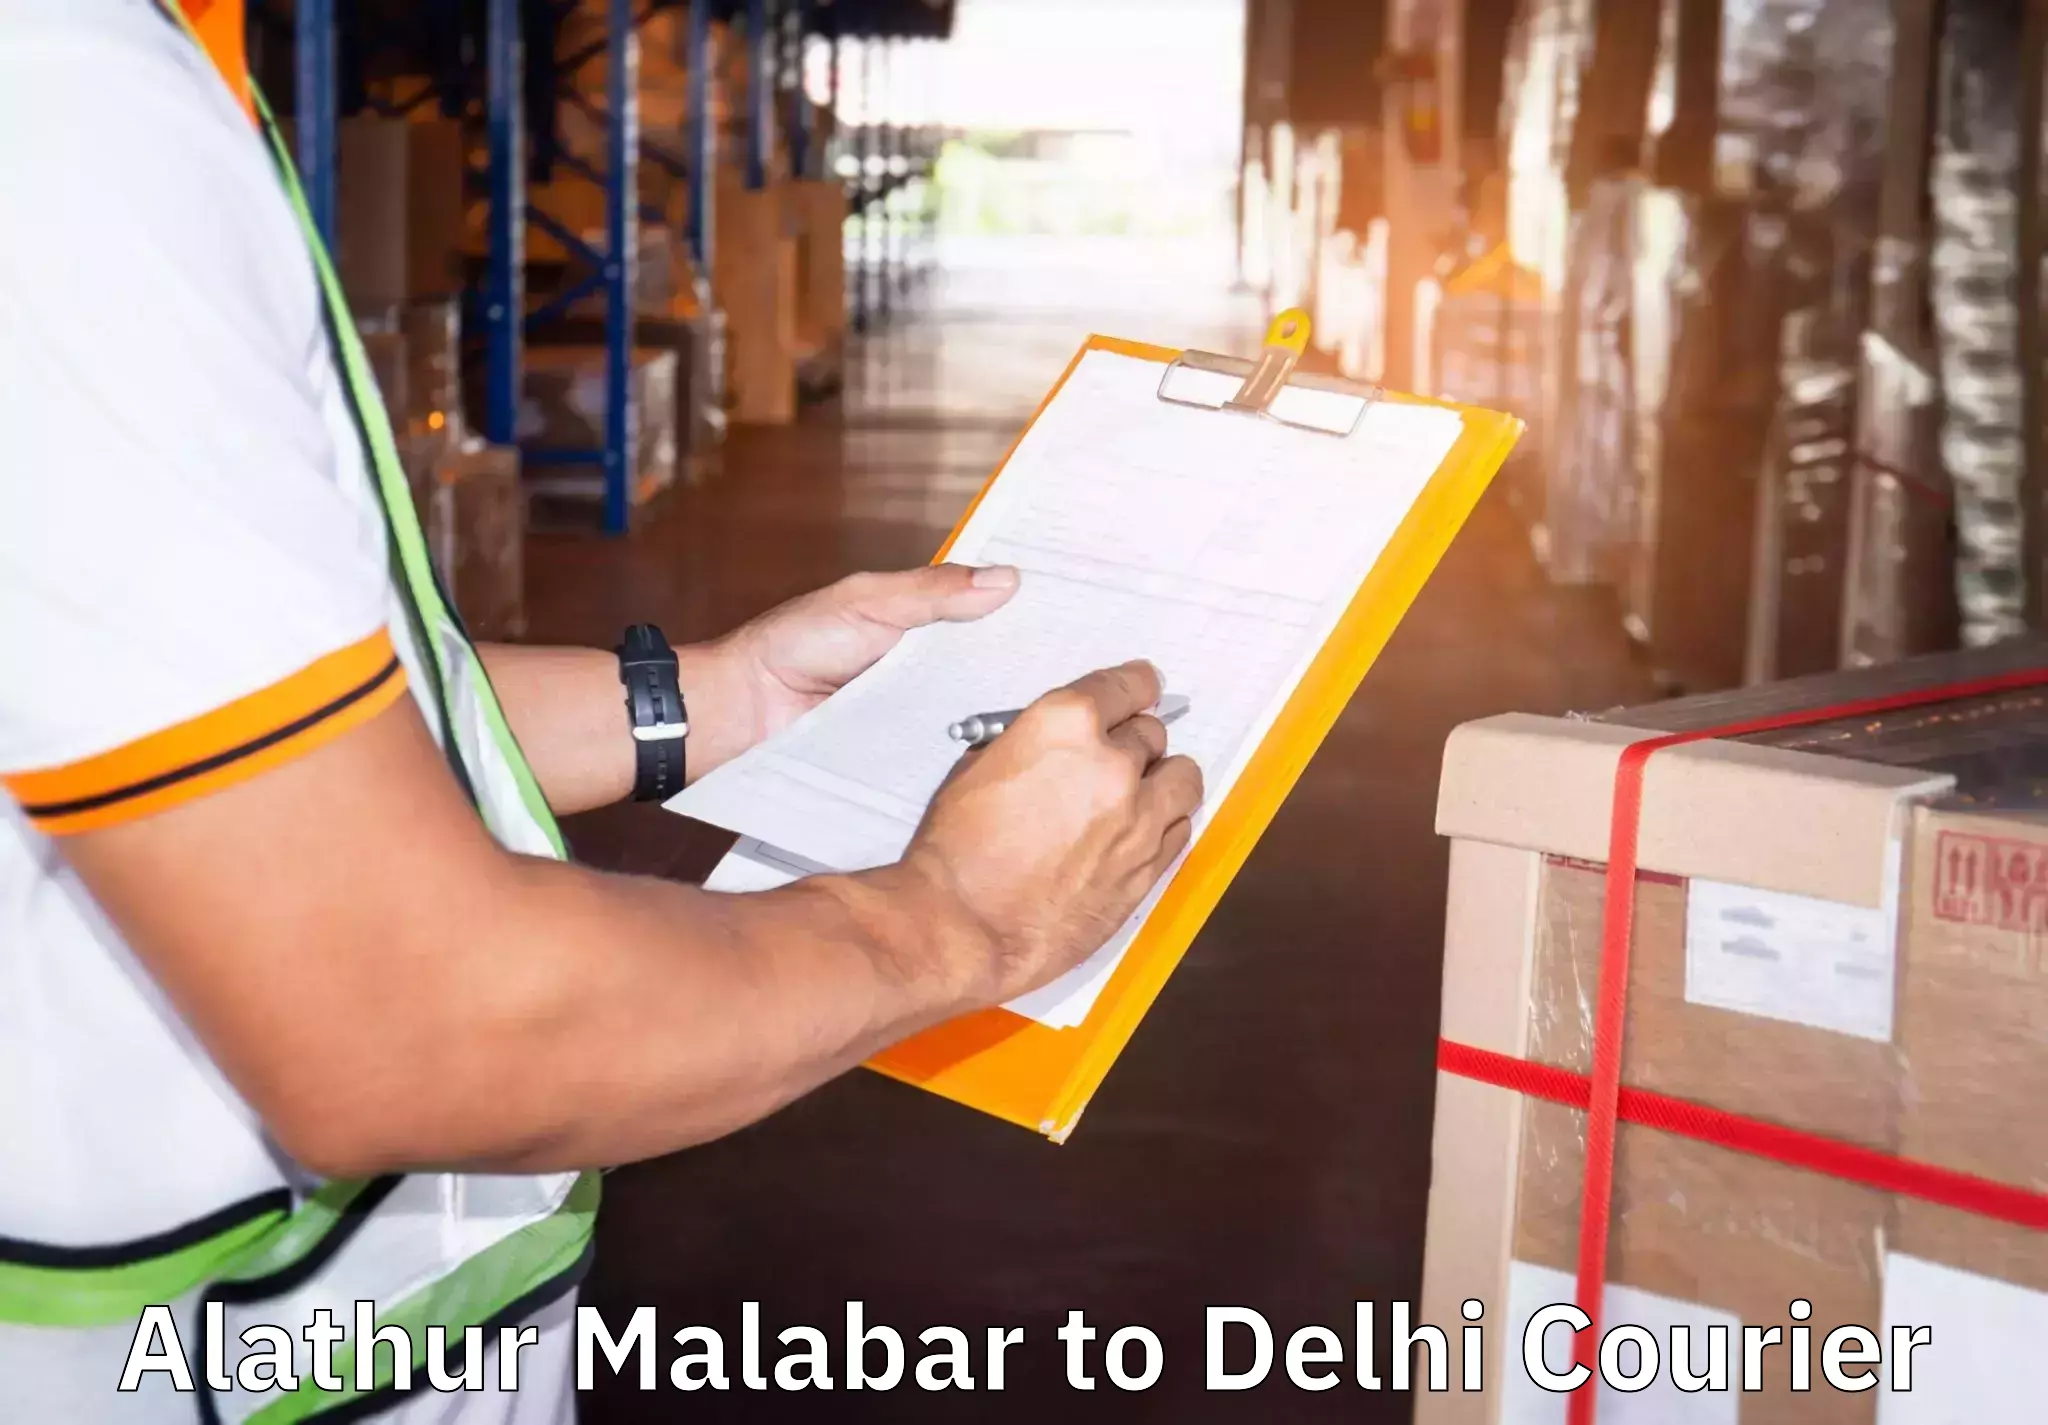 Moving and storage services Alathur Malabar to Delhi